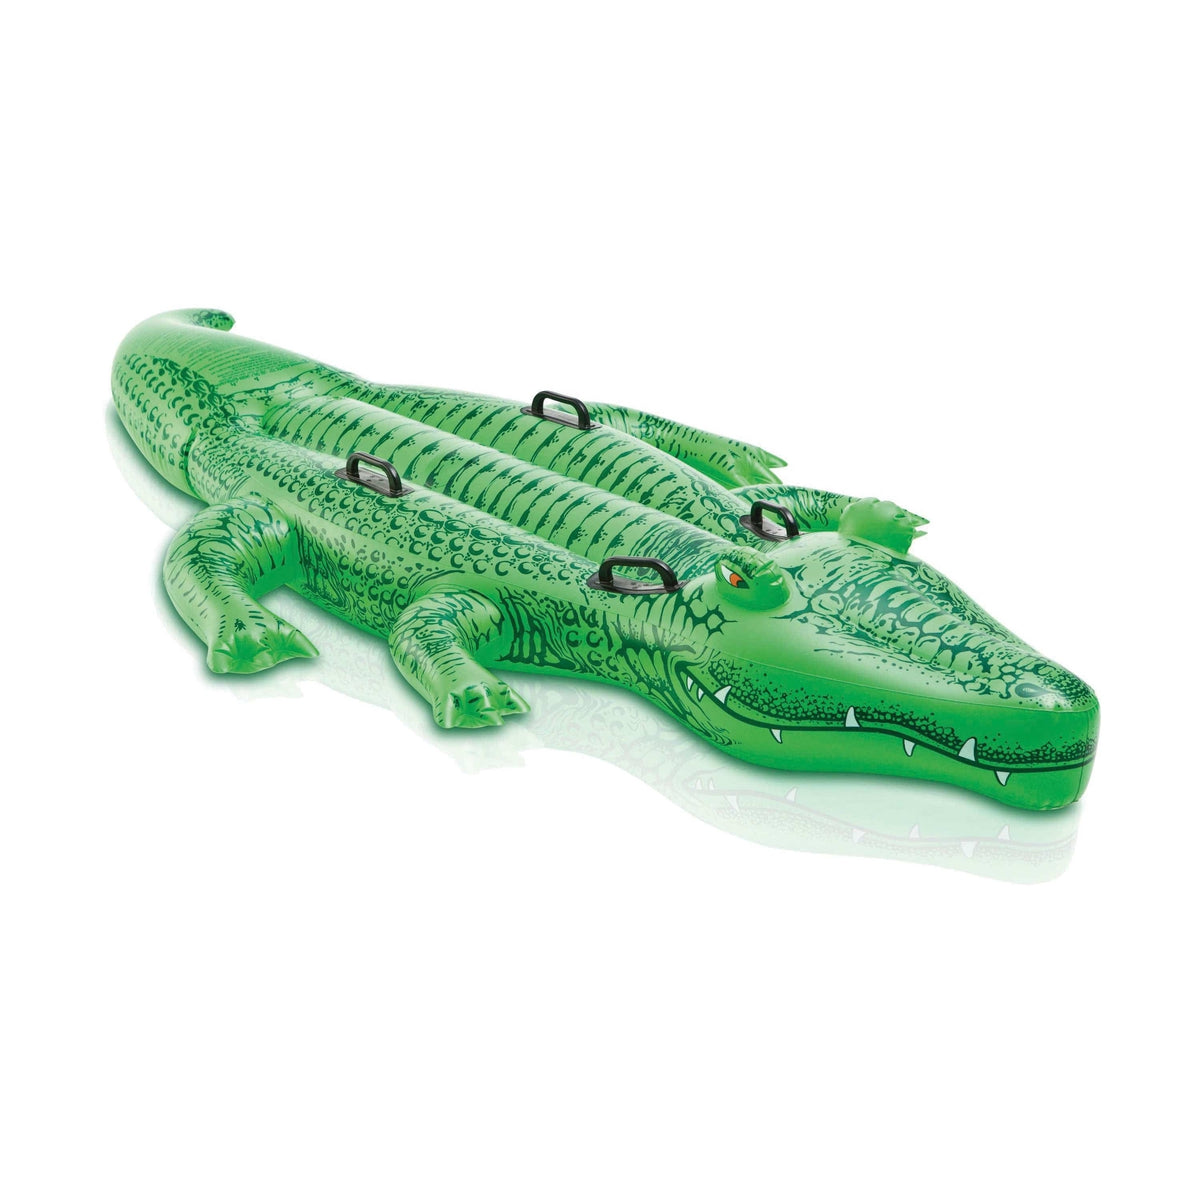 Intex Qualifies for Free Shipping Intex Giant Gator Ride On #58562EP